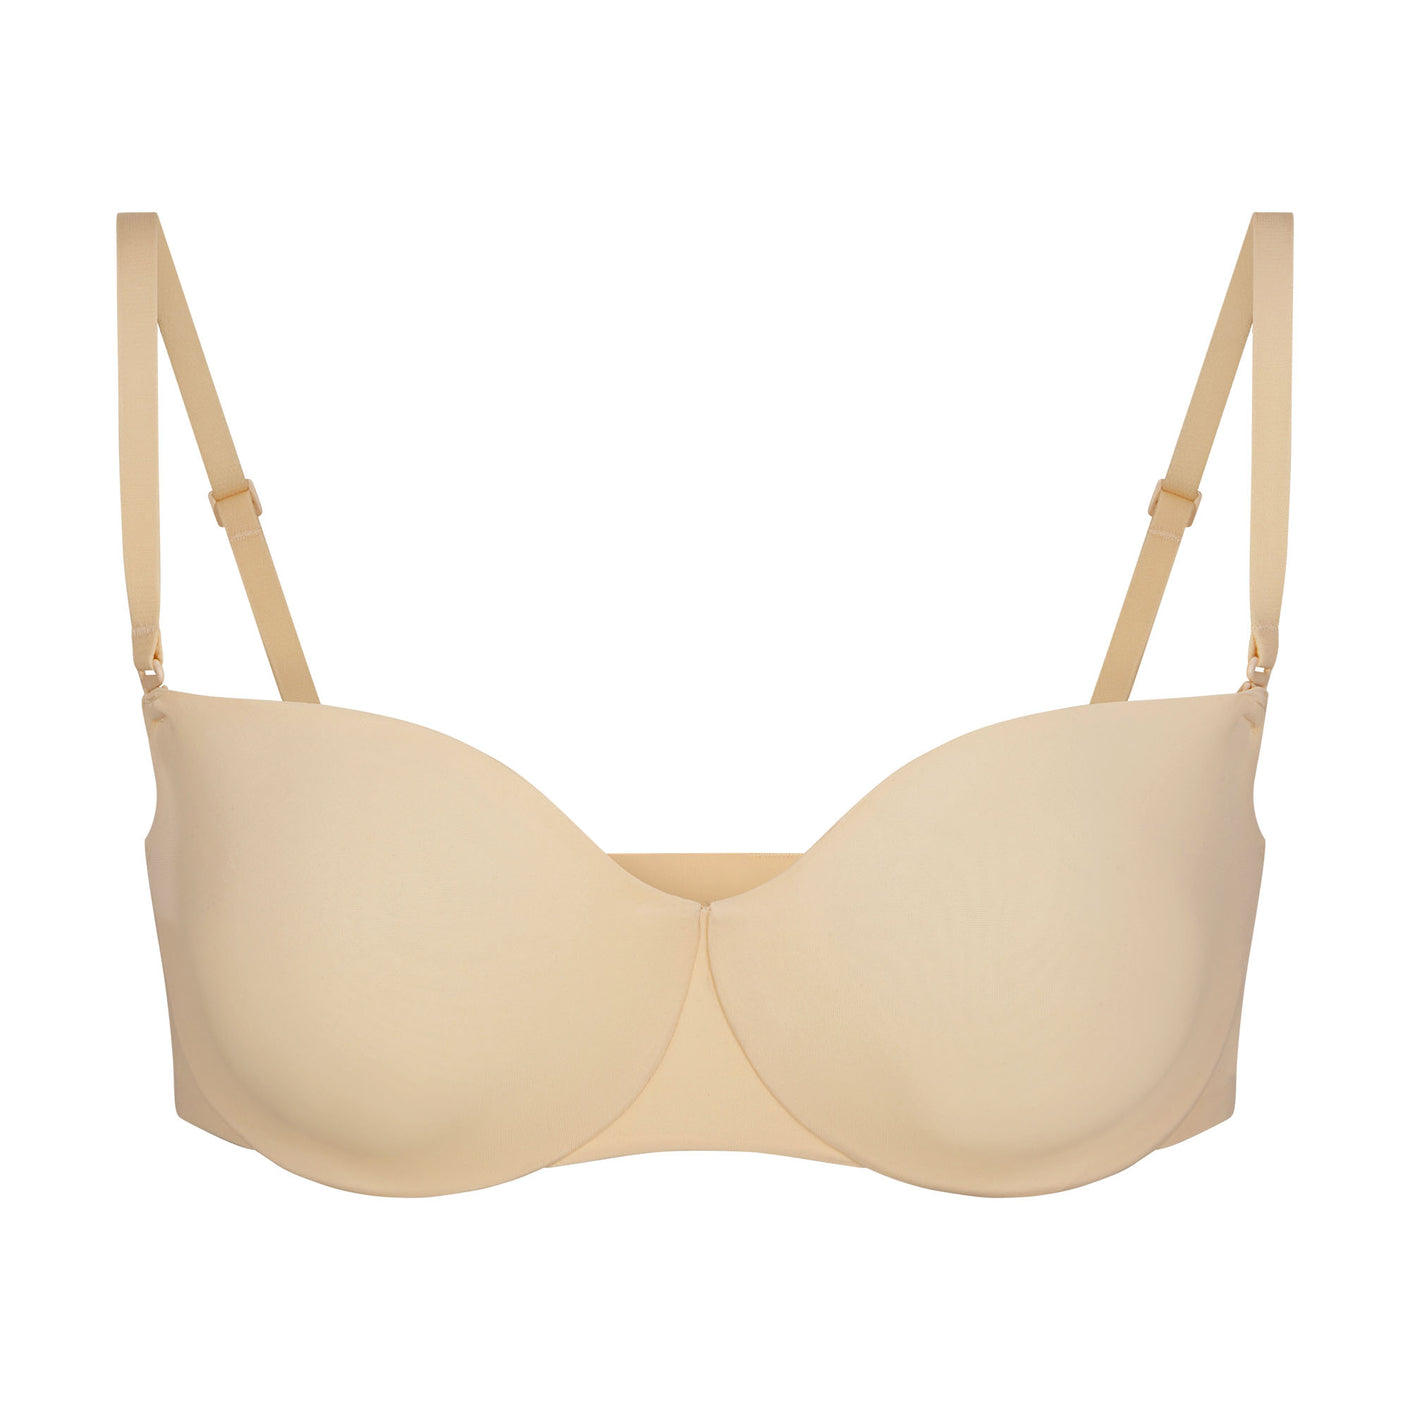 SKIMS Strapless Bra NWT 34A Tan Size 34 A - $30 (44% Off Retail) New With  Tags - From Ali